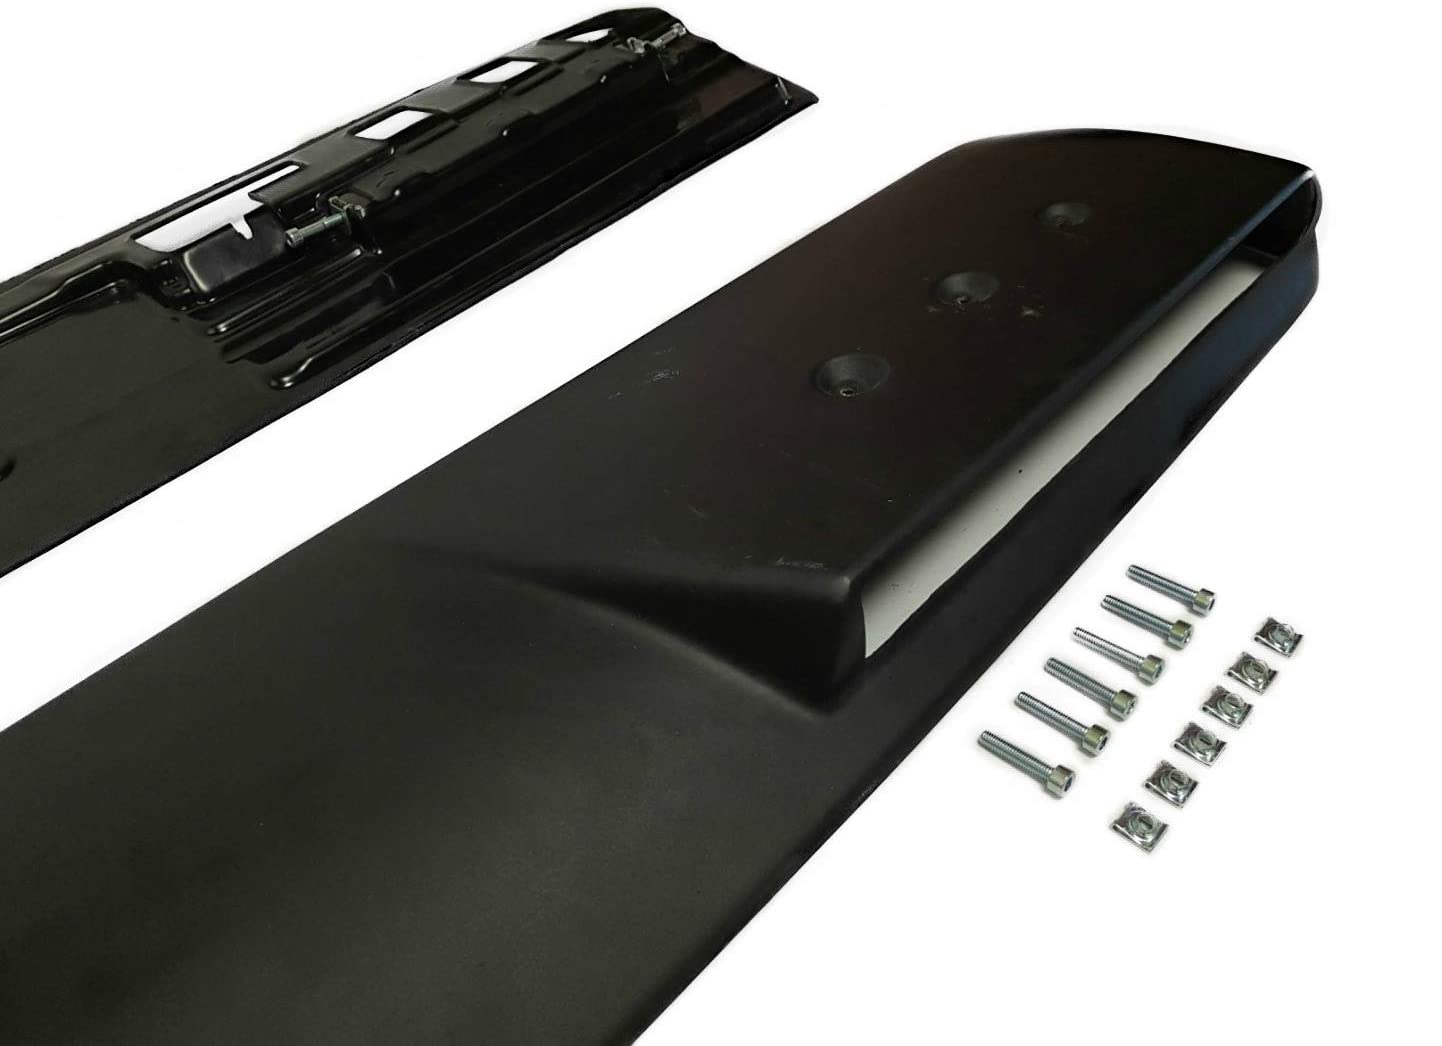 Fiberglass front roof spoiler with LEDs for Mercedes-Benz W463A W464 G-Class